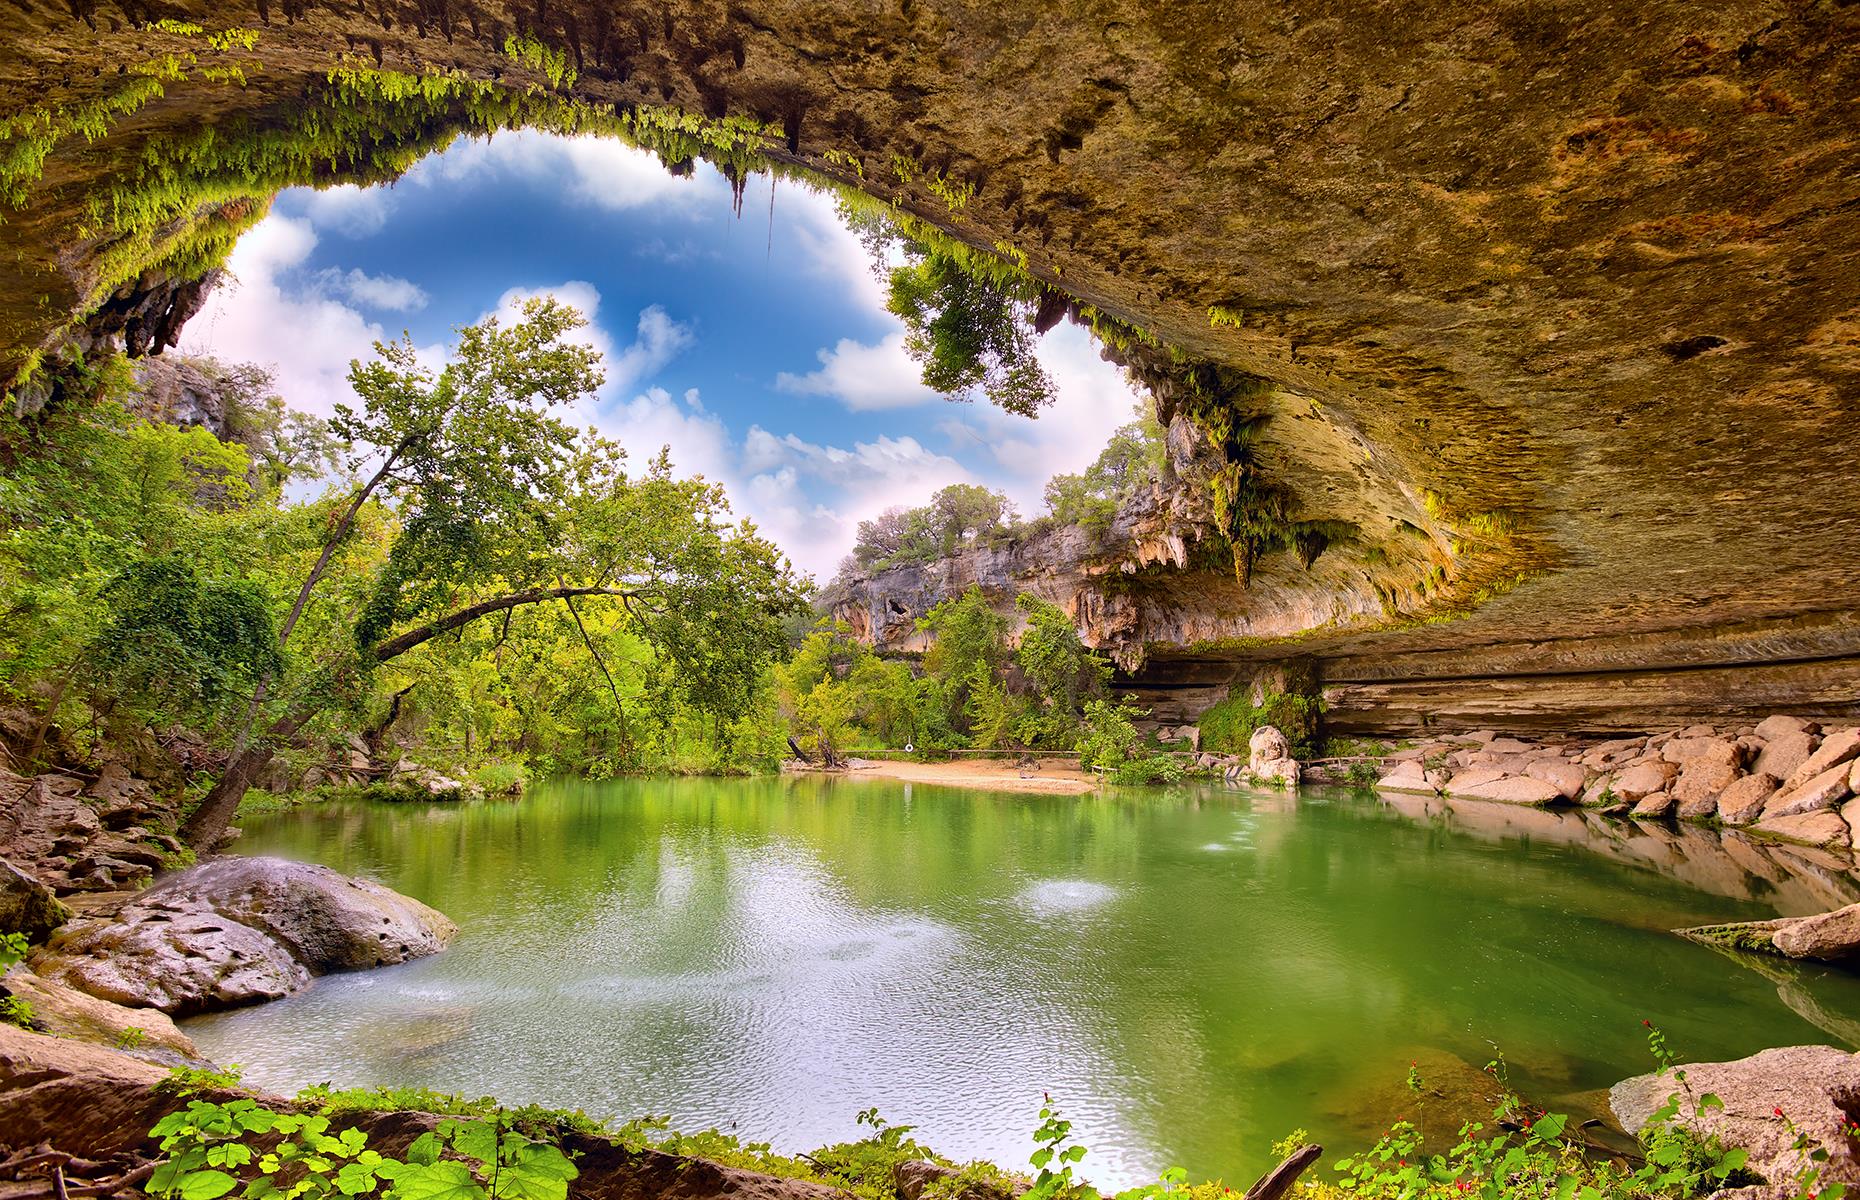 <p>Normally popular with Austin locals in summer, Hamilton Pool Preserve is a natural swimming hole just 30 miles (48km) west of the Texas state capital. The bright green pool, fed by a 50-foot (15m) waterfall, was once entirely underground until the sheltering limestone roof above it collapsed. Usually, swimming is allowed between May and September, and visitors <a href="https://parks.traviscountytx.gov/parks/hamilton-pool-preserve">need to make a reservation</a> online.</p>  <p><strong><a href="https://www.loveexploring.com/galleries/87438/americas-most-stunning-lakes?page=1">Read more about America's most stunning lakes</a></strong></p>